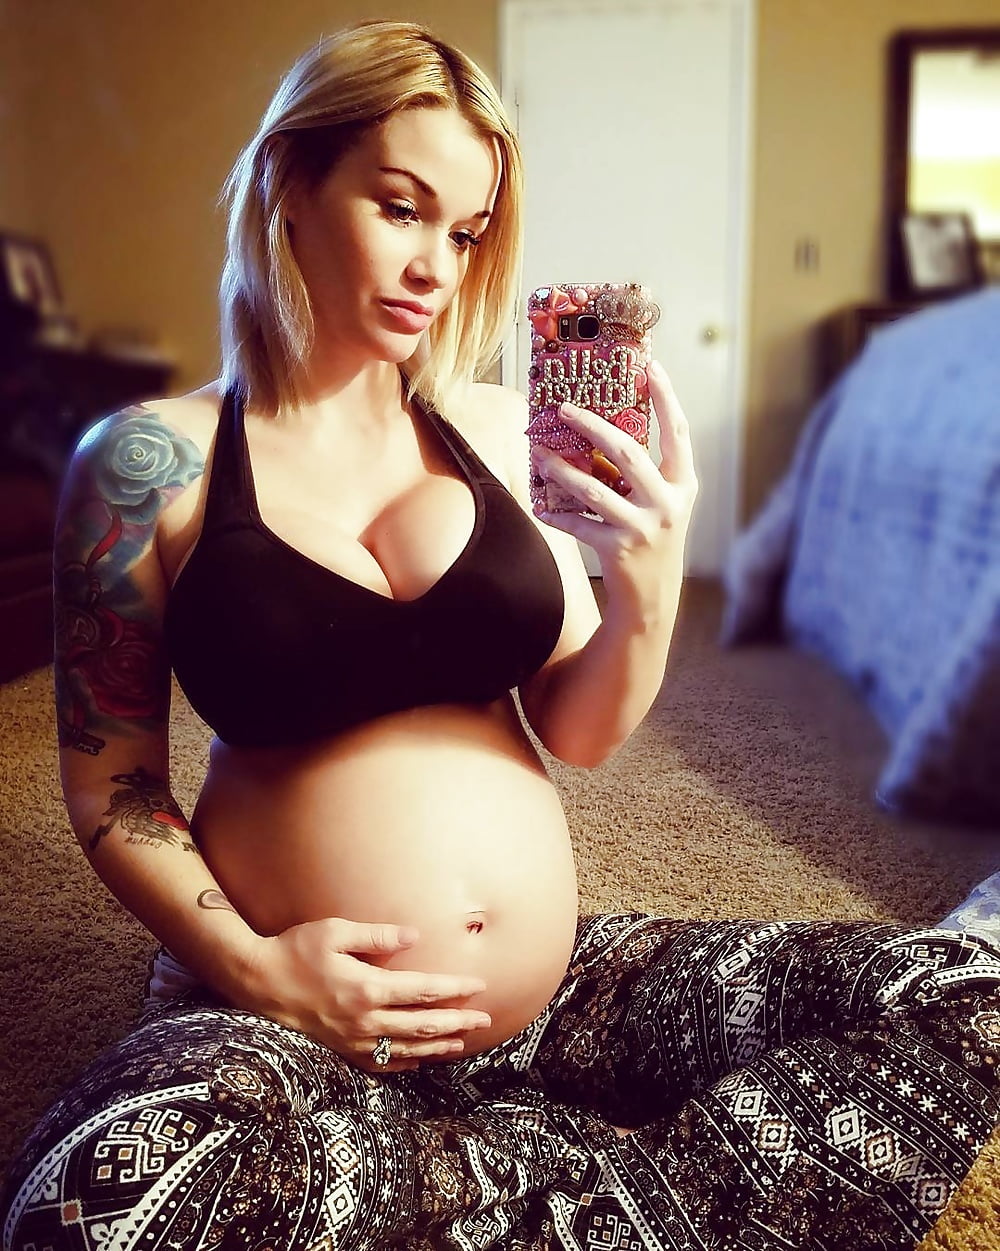 Pregnant_very_fit_sports_milf (4/11)